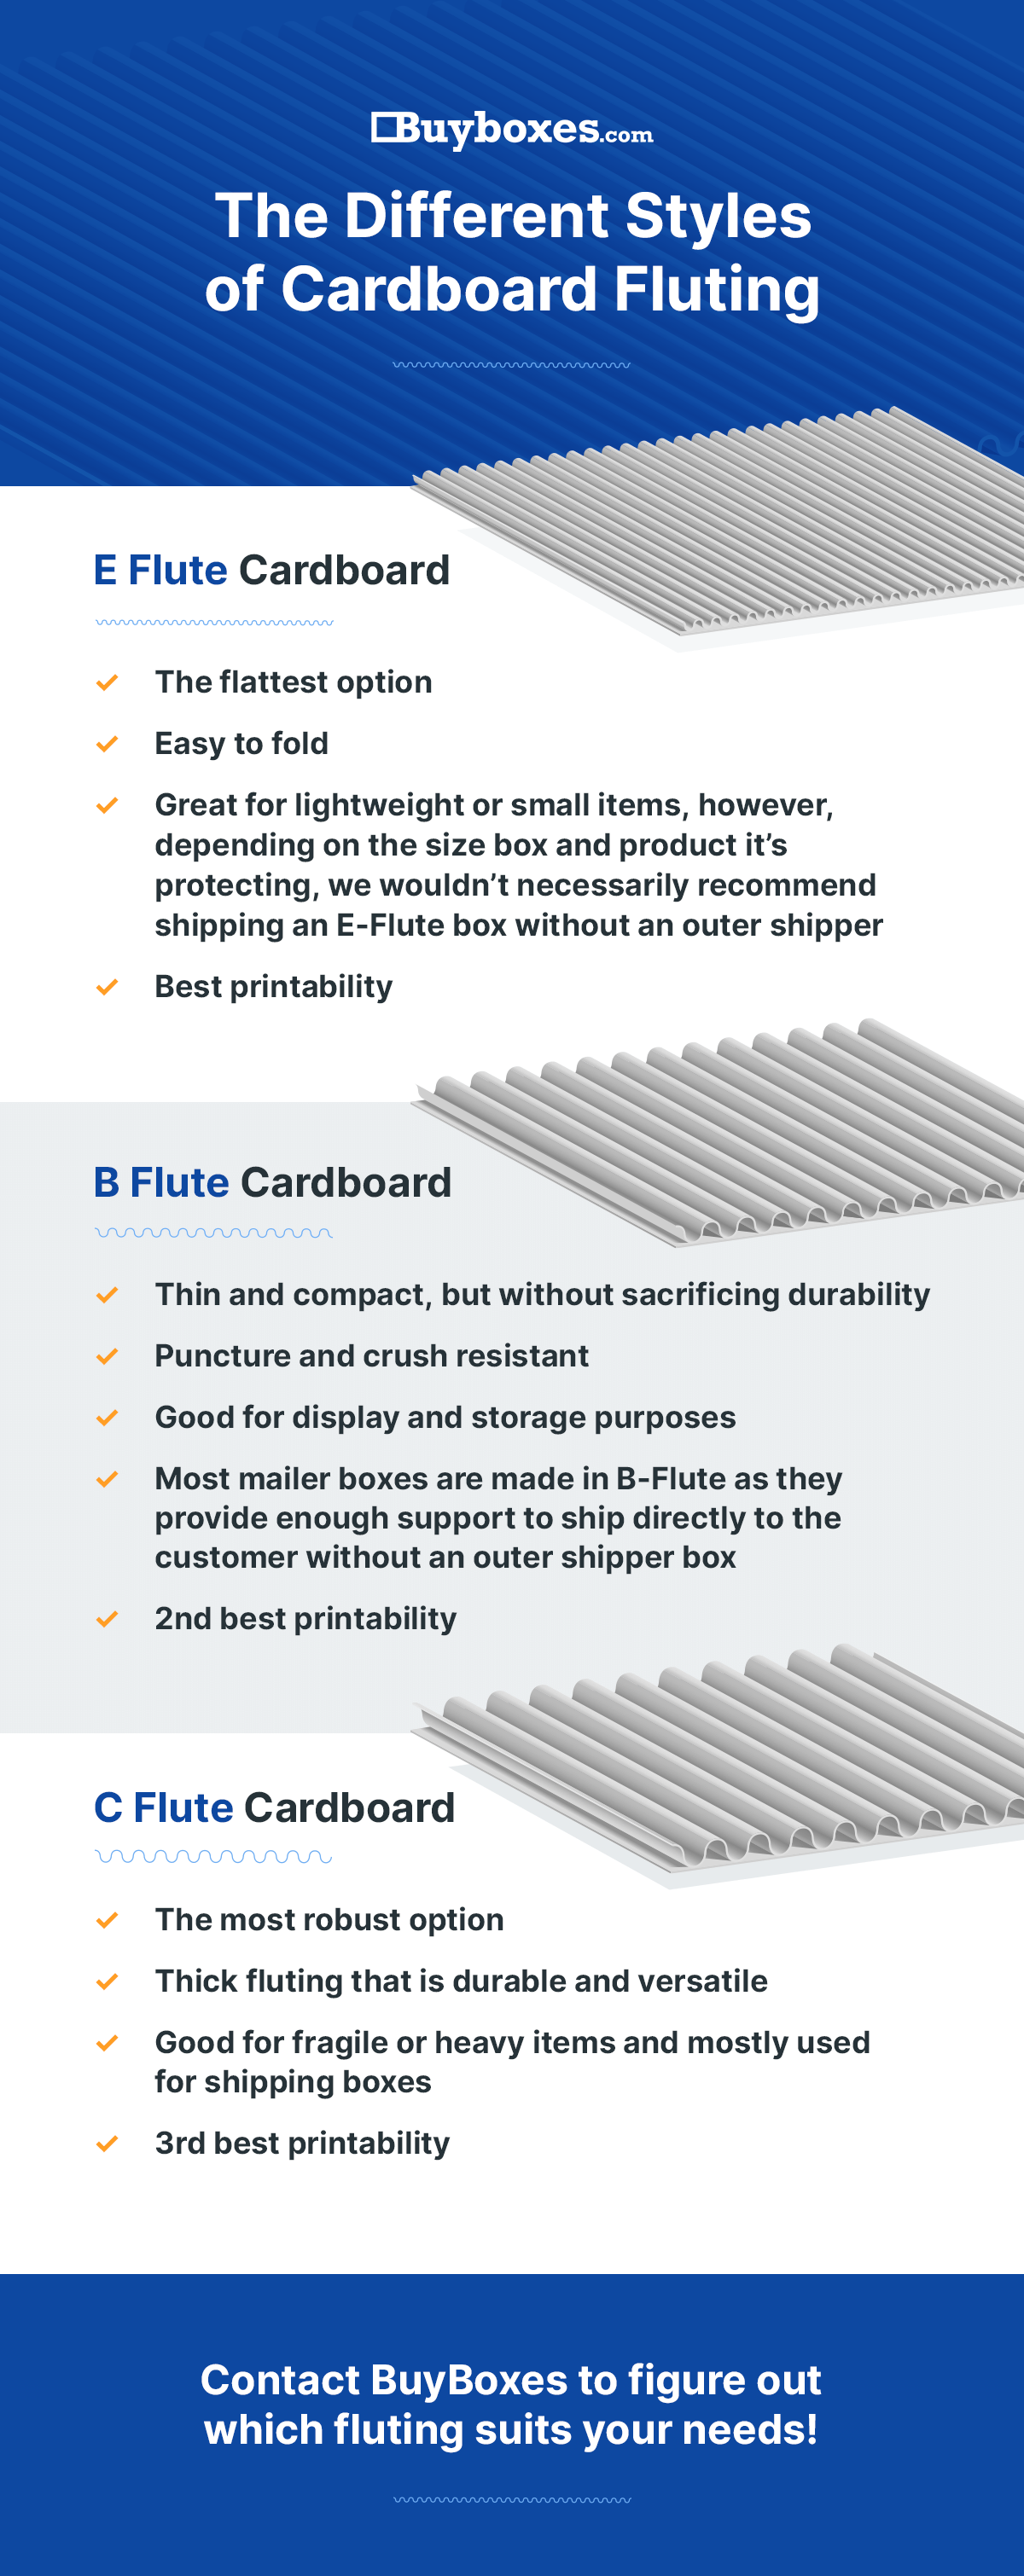 The different styles of cardboard flutes